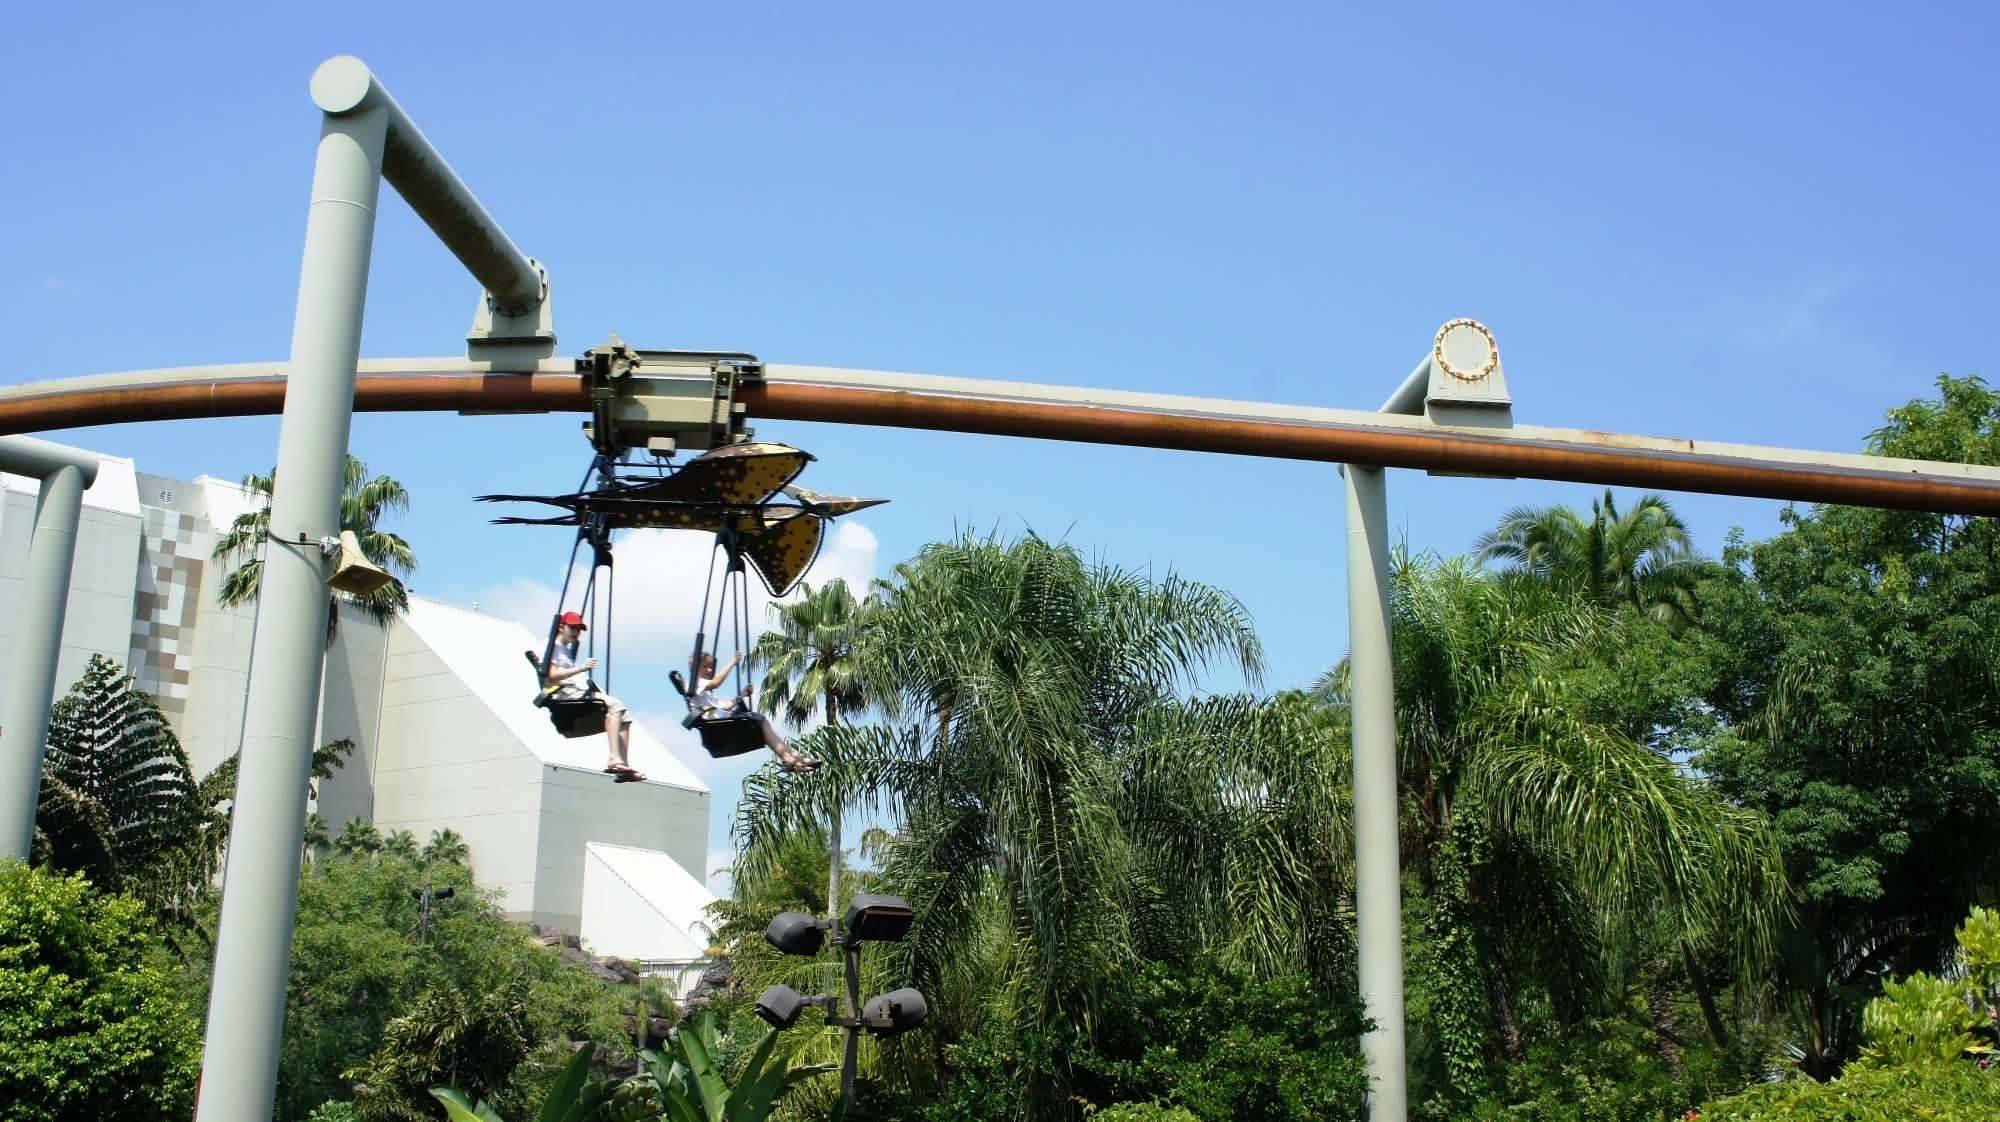 Pteranodon Flyers at Universal's Islands of Adventure